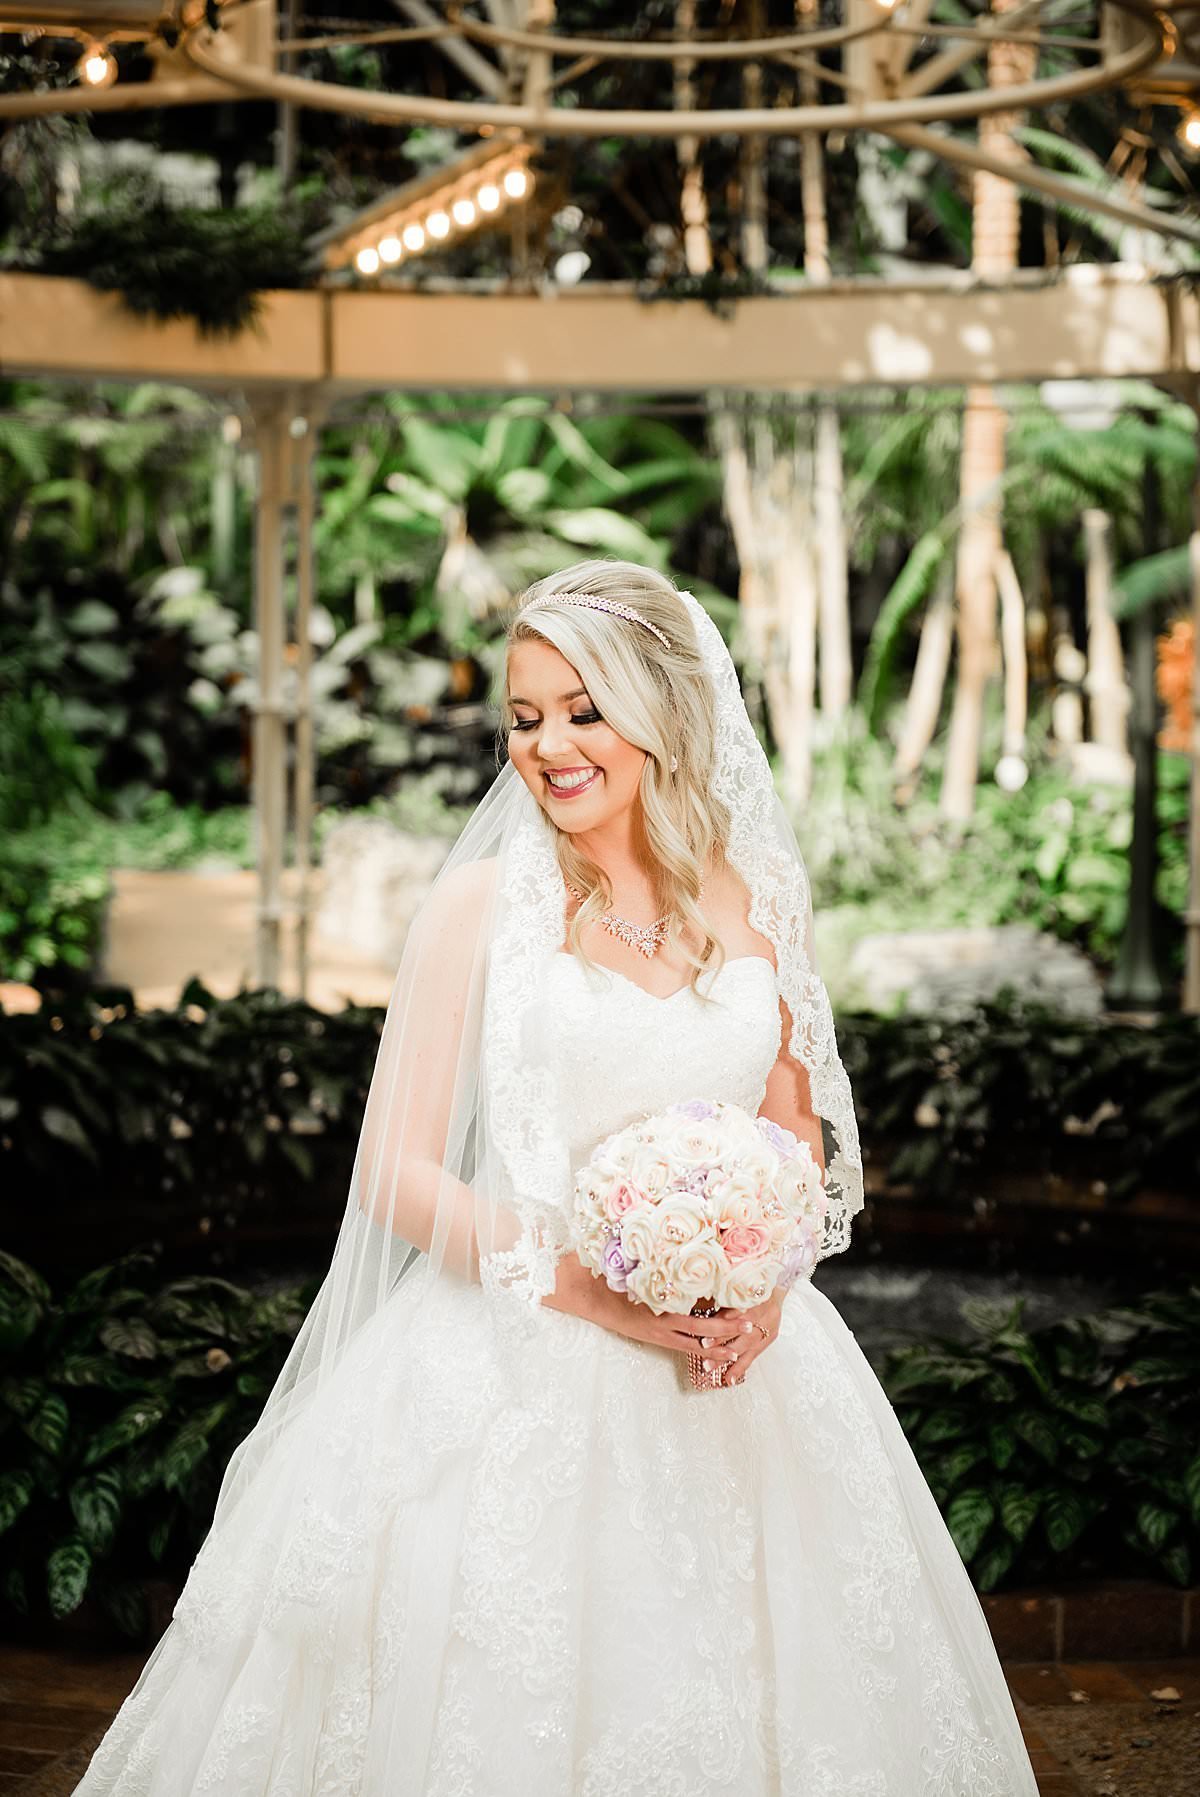 Bride wearing Cinderella  ballgown and smiling to the side, lace trim veil and holding light colored bouquet